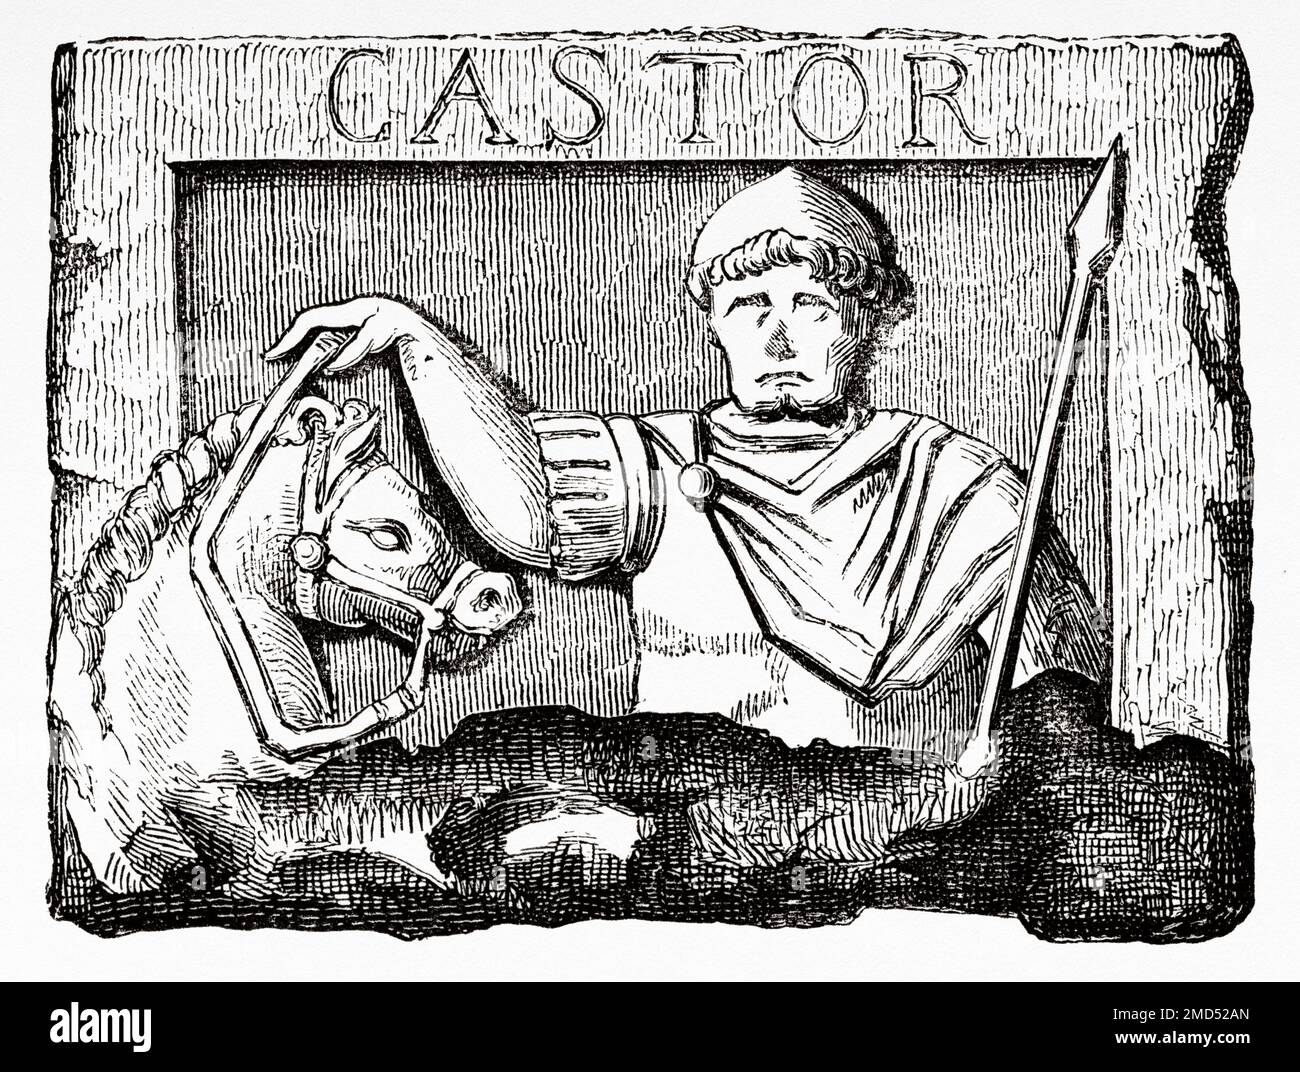 Castor with a horse. Pillar of the Boatman Gallo-Roman sculpture discovered in 1711 in Notre Dame de Paris, France. The Arts of the Middle Ages and at the Period of the Renaissance by Paul Lacroix, 1874 Stock Photo